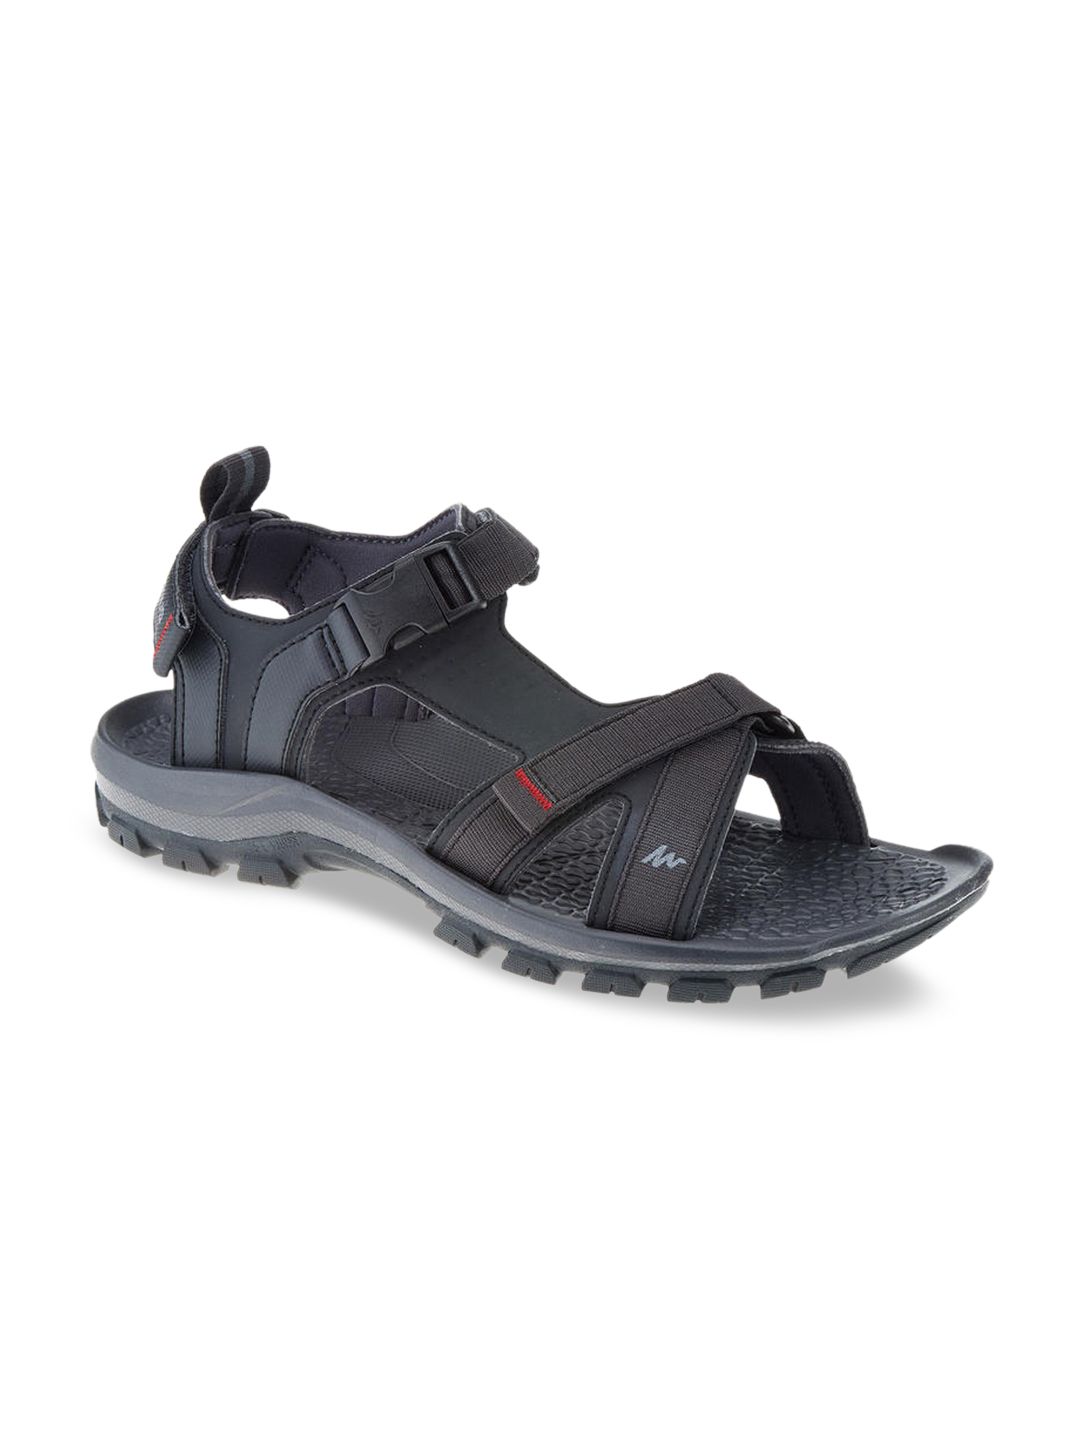 Quechua By Decathlon Unisex Black Sports Sandal Price in India